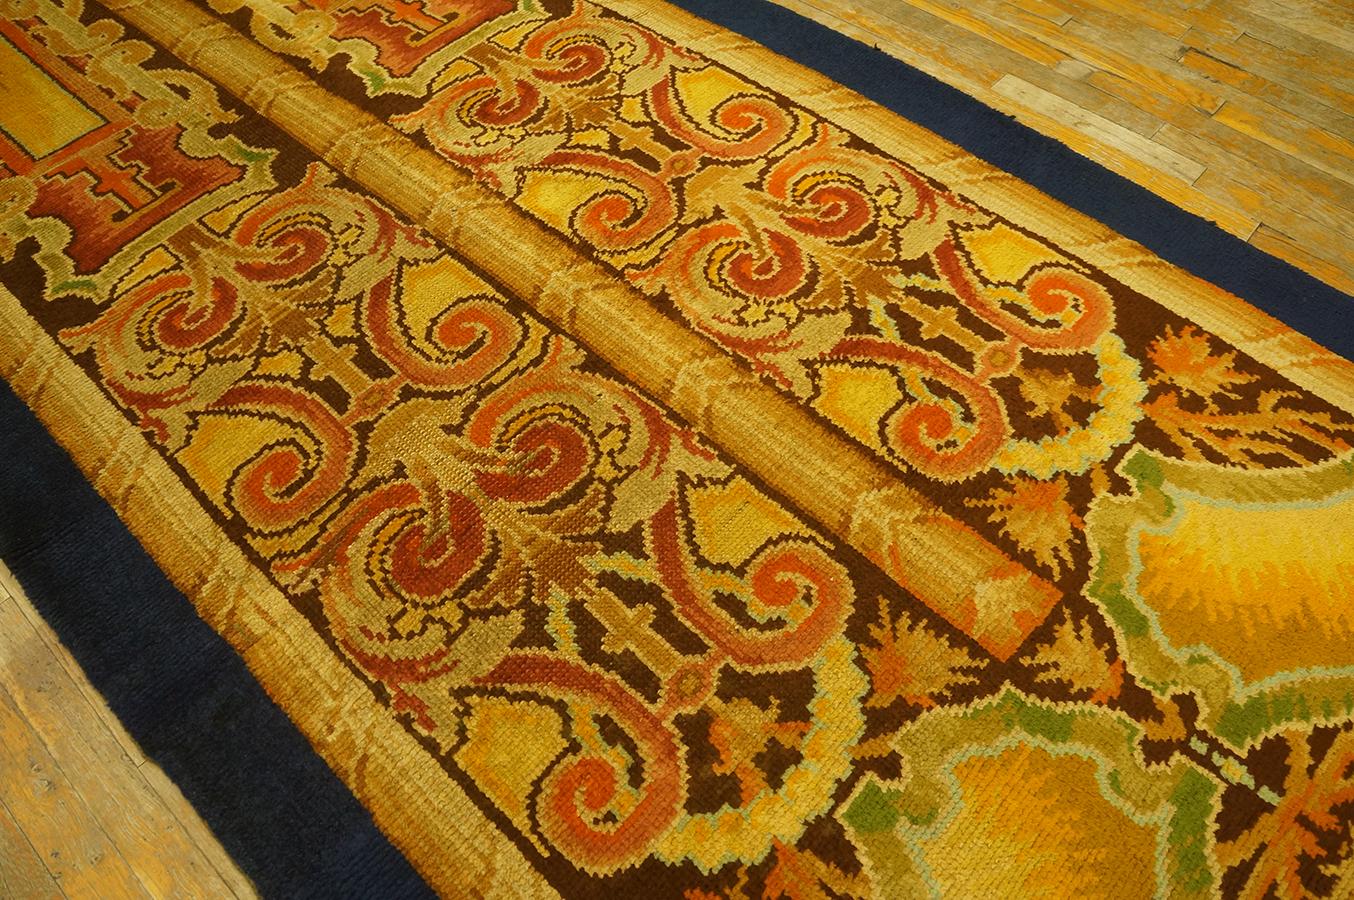 Early 20th Century English Axminster Carpet ( 4'9